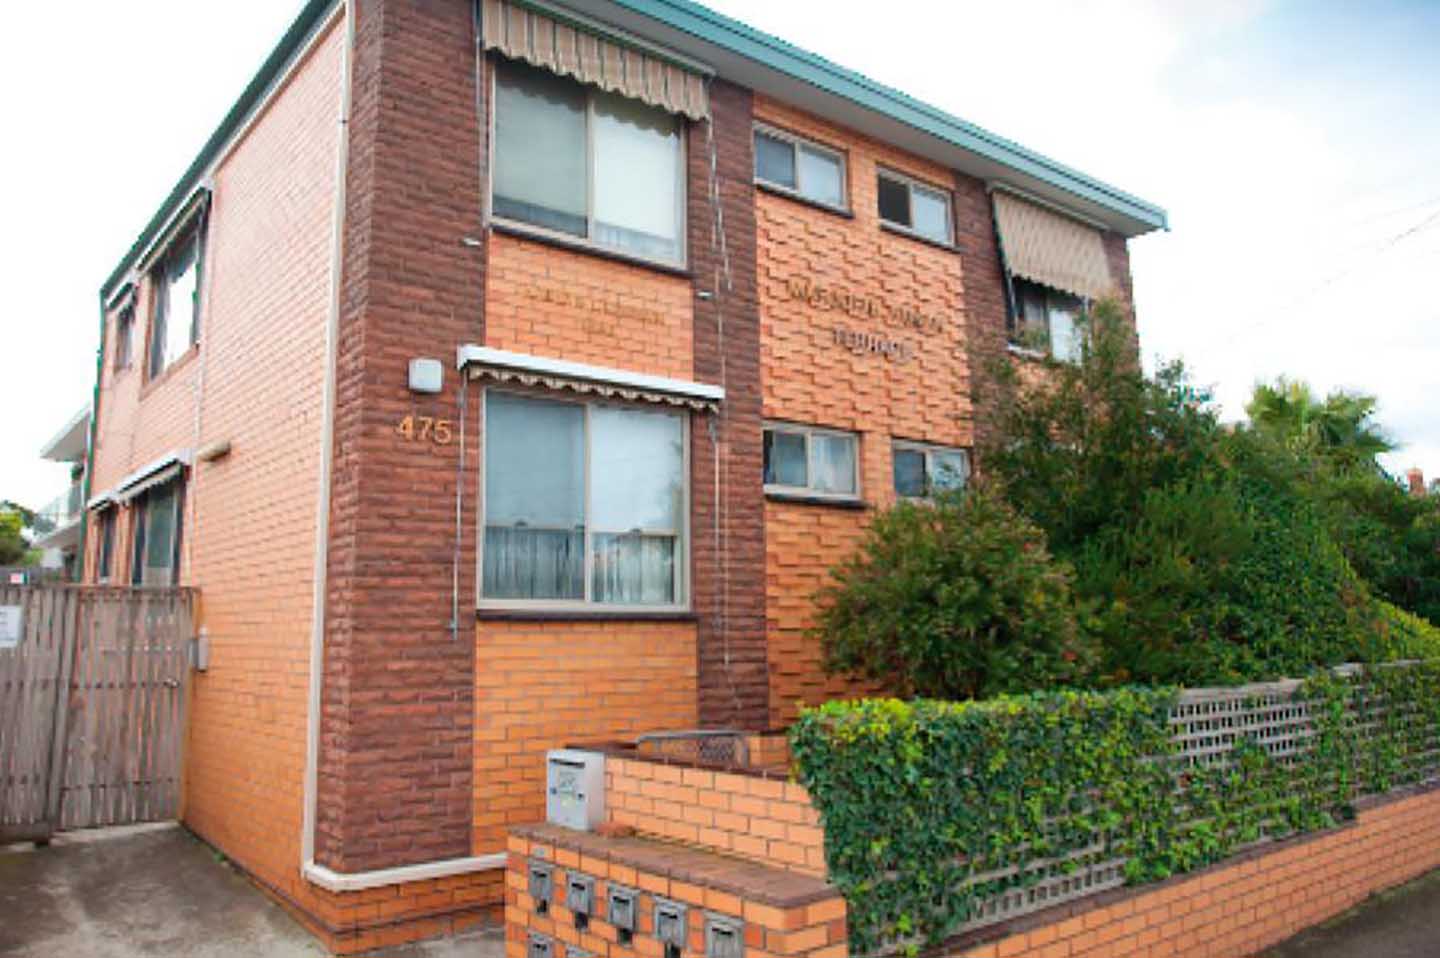 The building where the apartment is located is an aged care home.